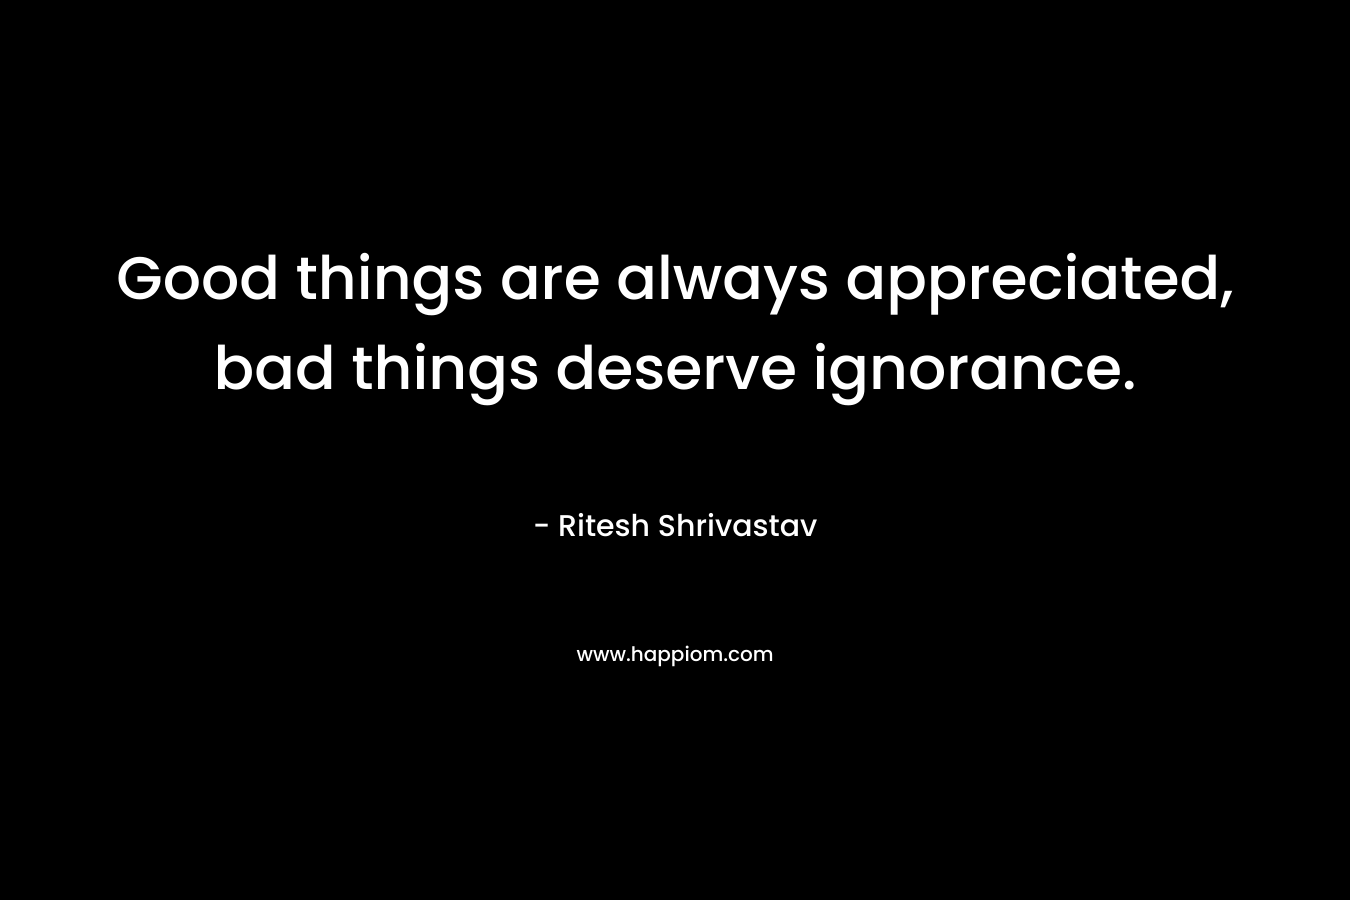 Good things are always appreciated, bad things deserve ignorance.